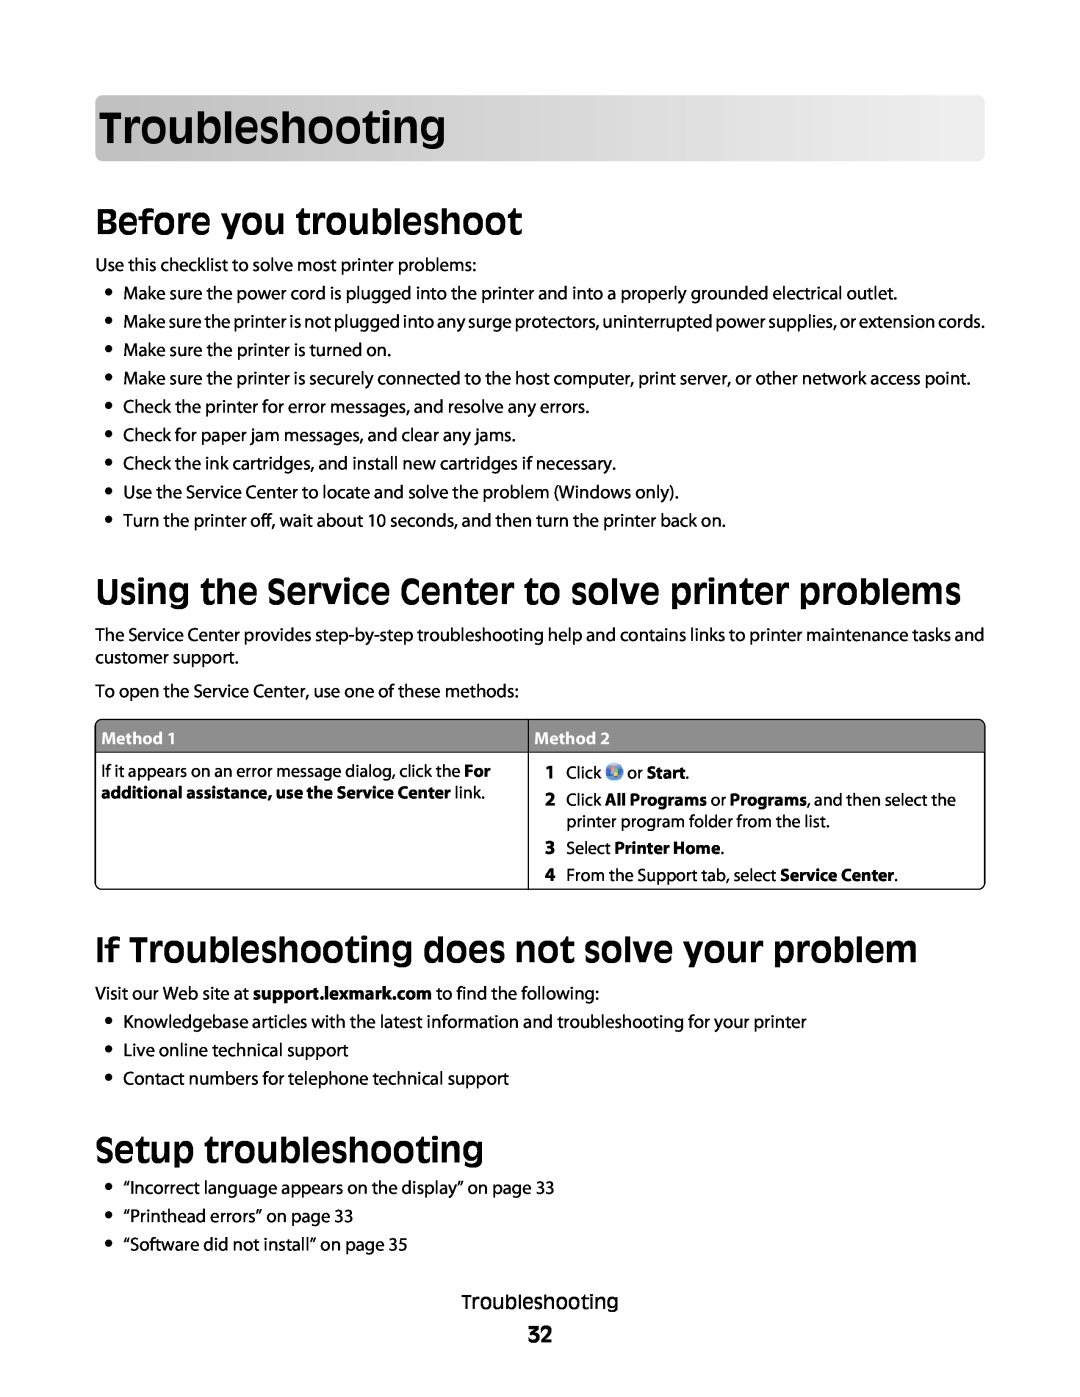 Lexmark S400 manual Troubleshooting, Before you troubleshoot, Using the Service Center to solve printer problems 